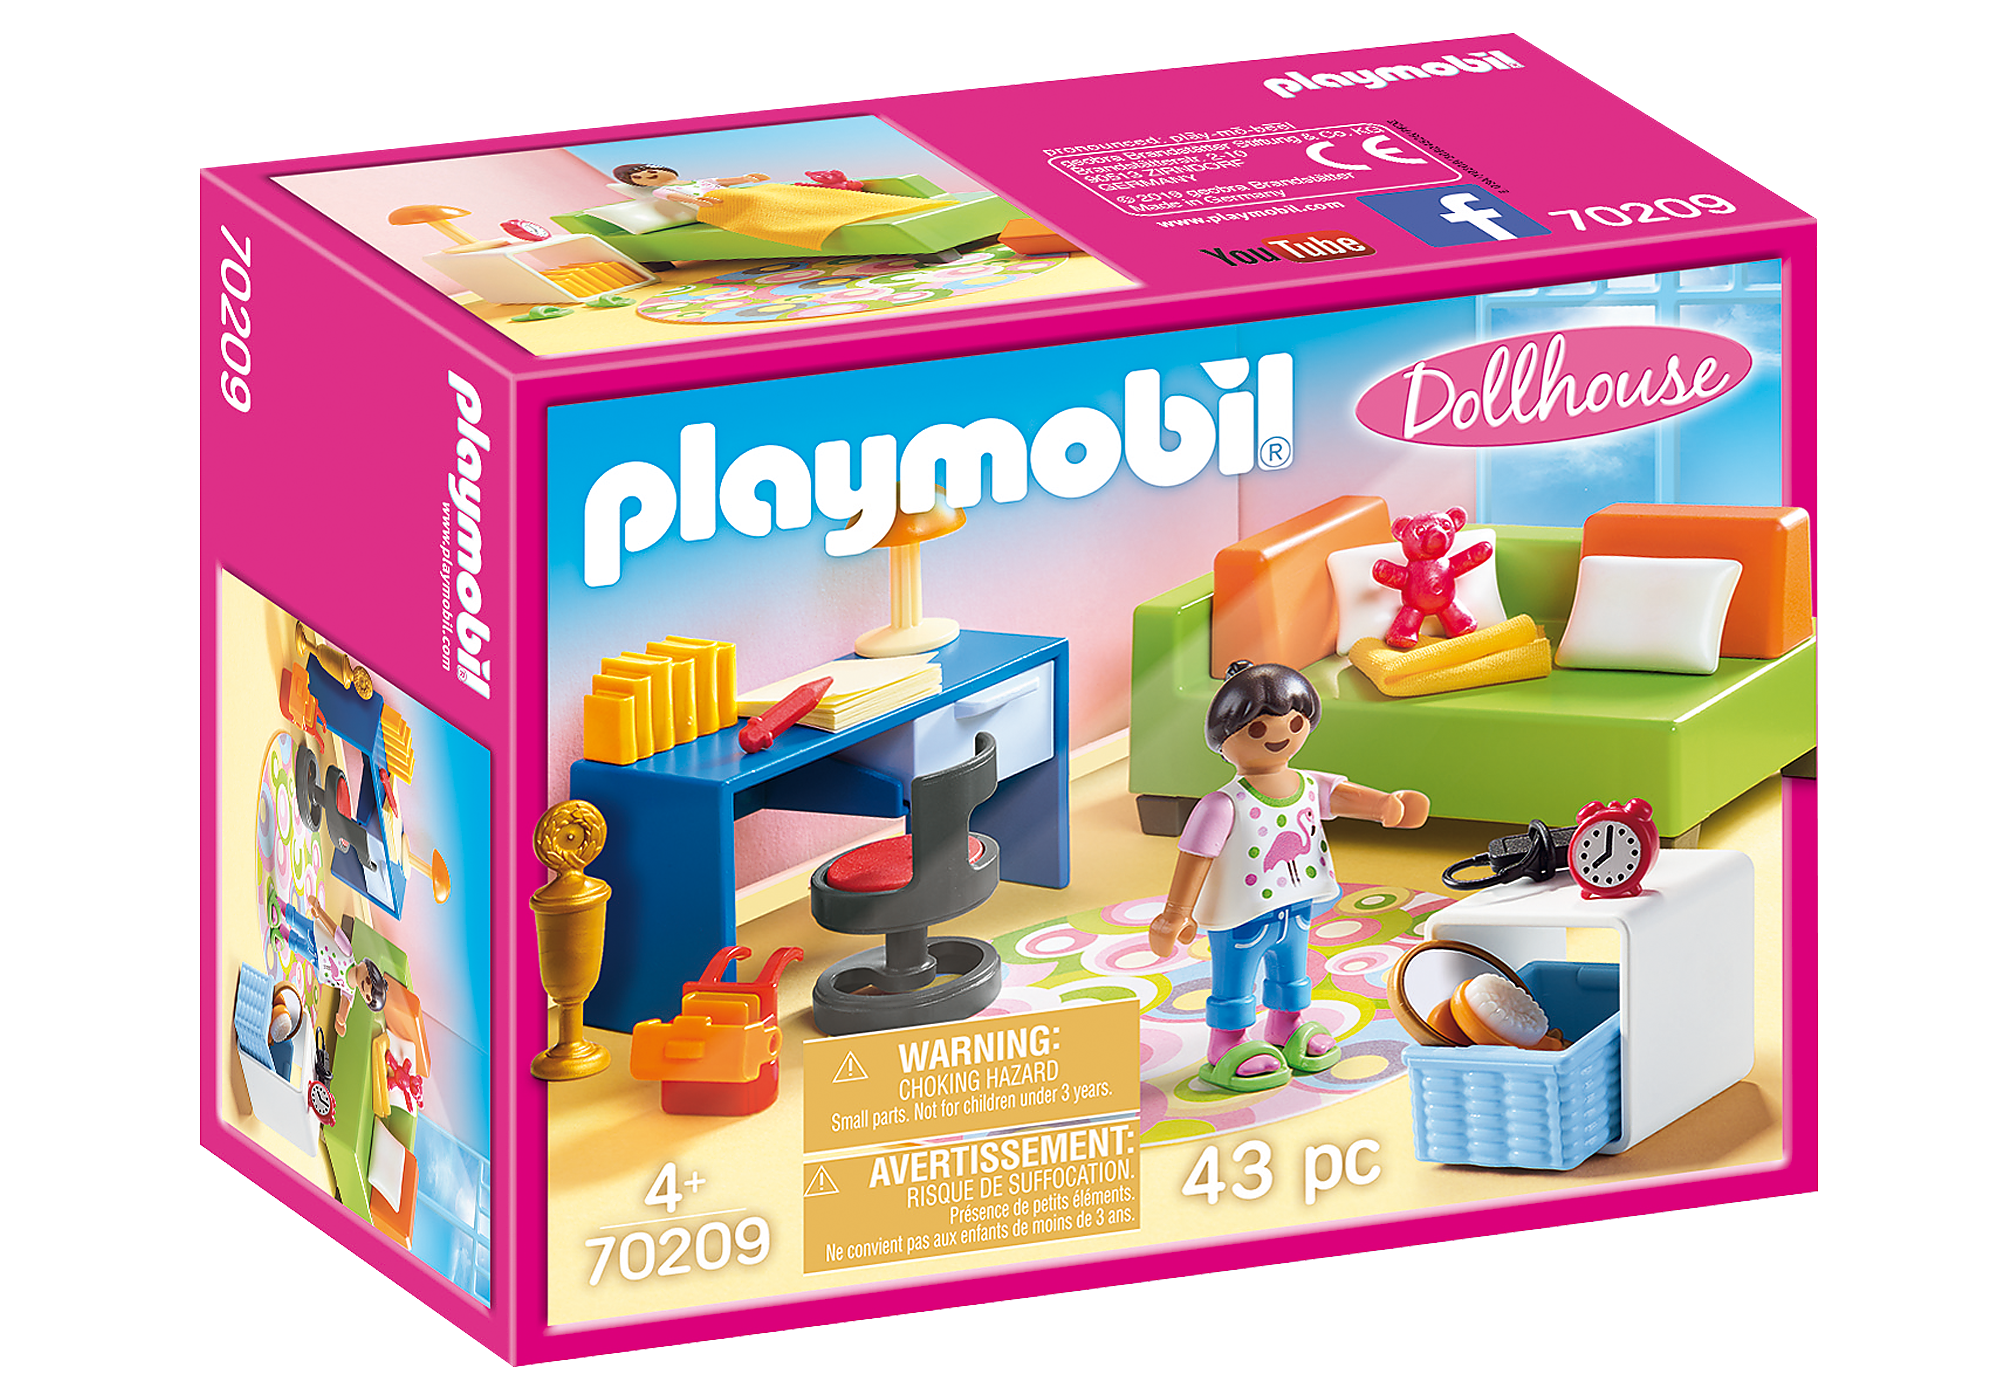 Playmobil Large Dollhouse, Recommended for ages 4 years and up 